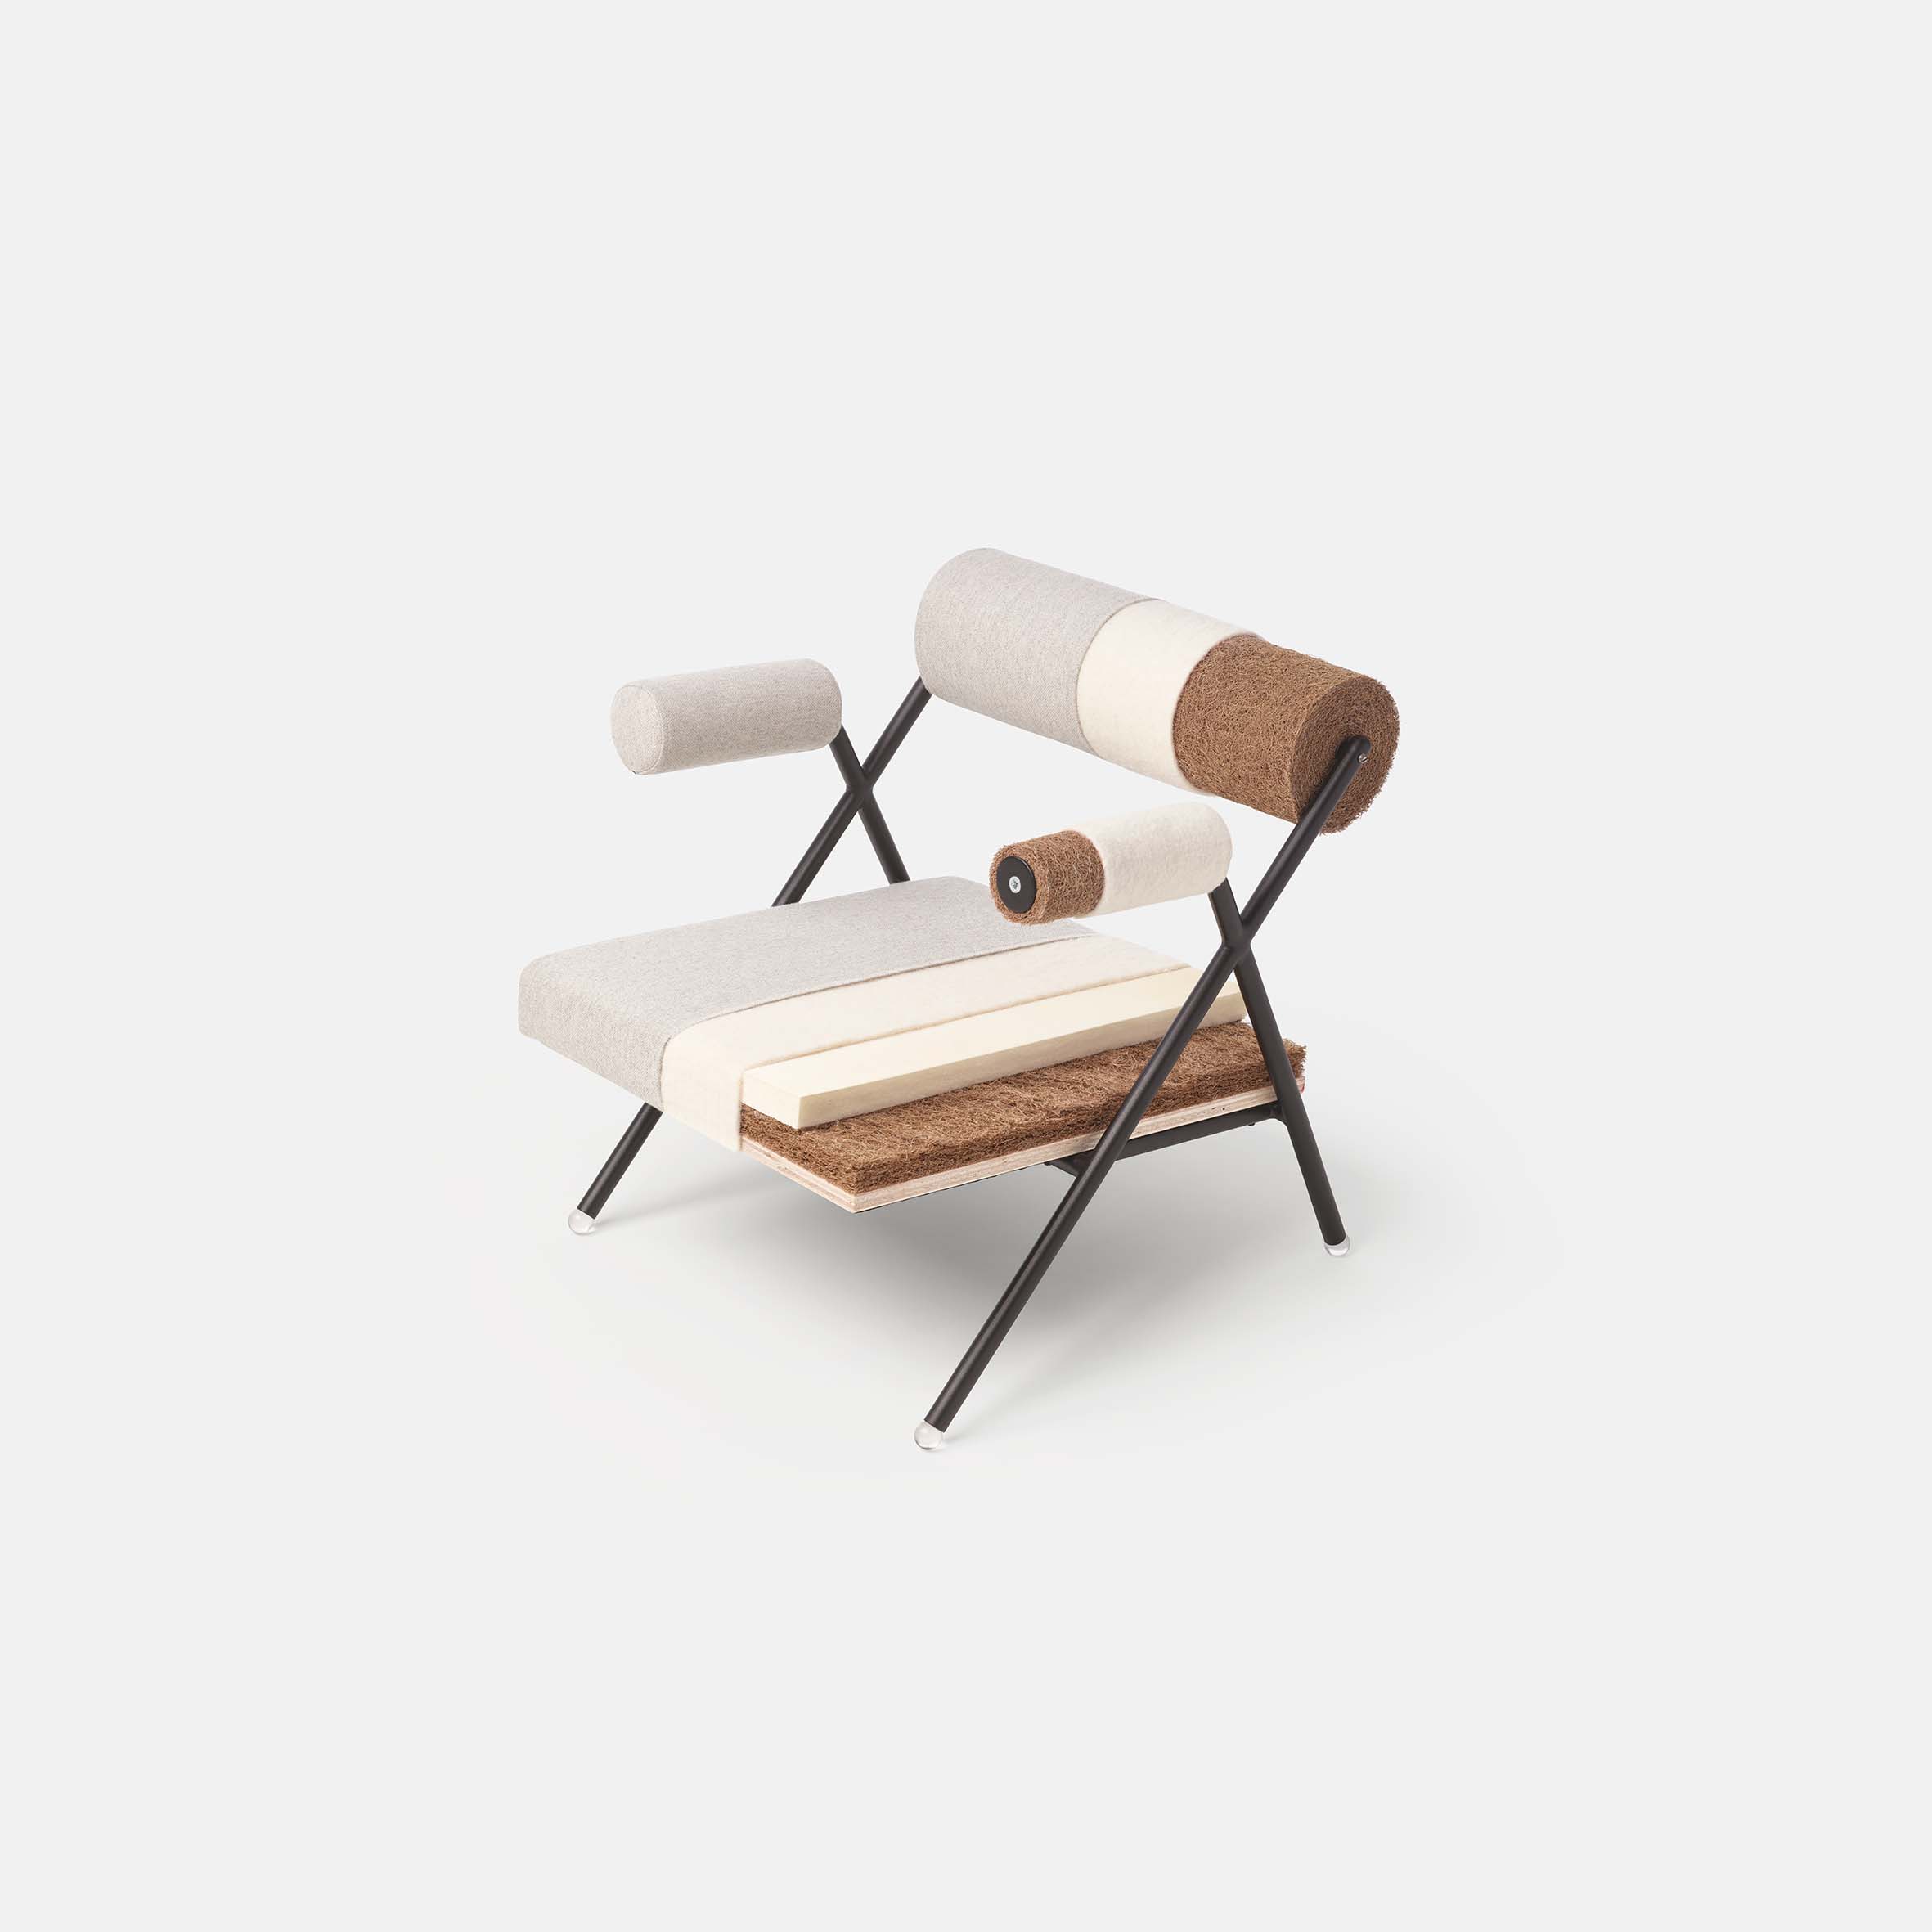 Rolls Chair fauteuil armchair Rob Parry Nel Oxford 0201 Exploded view Kvadrat Febrik